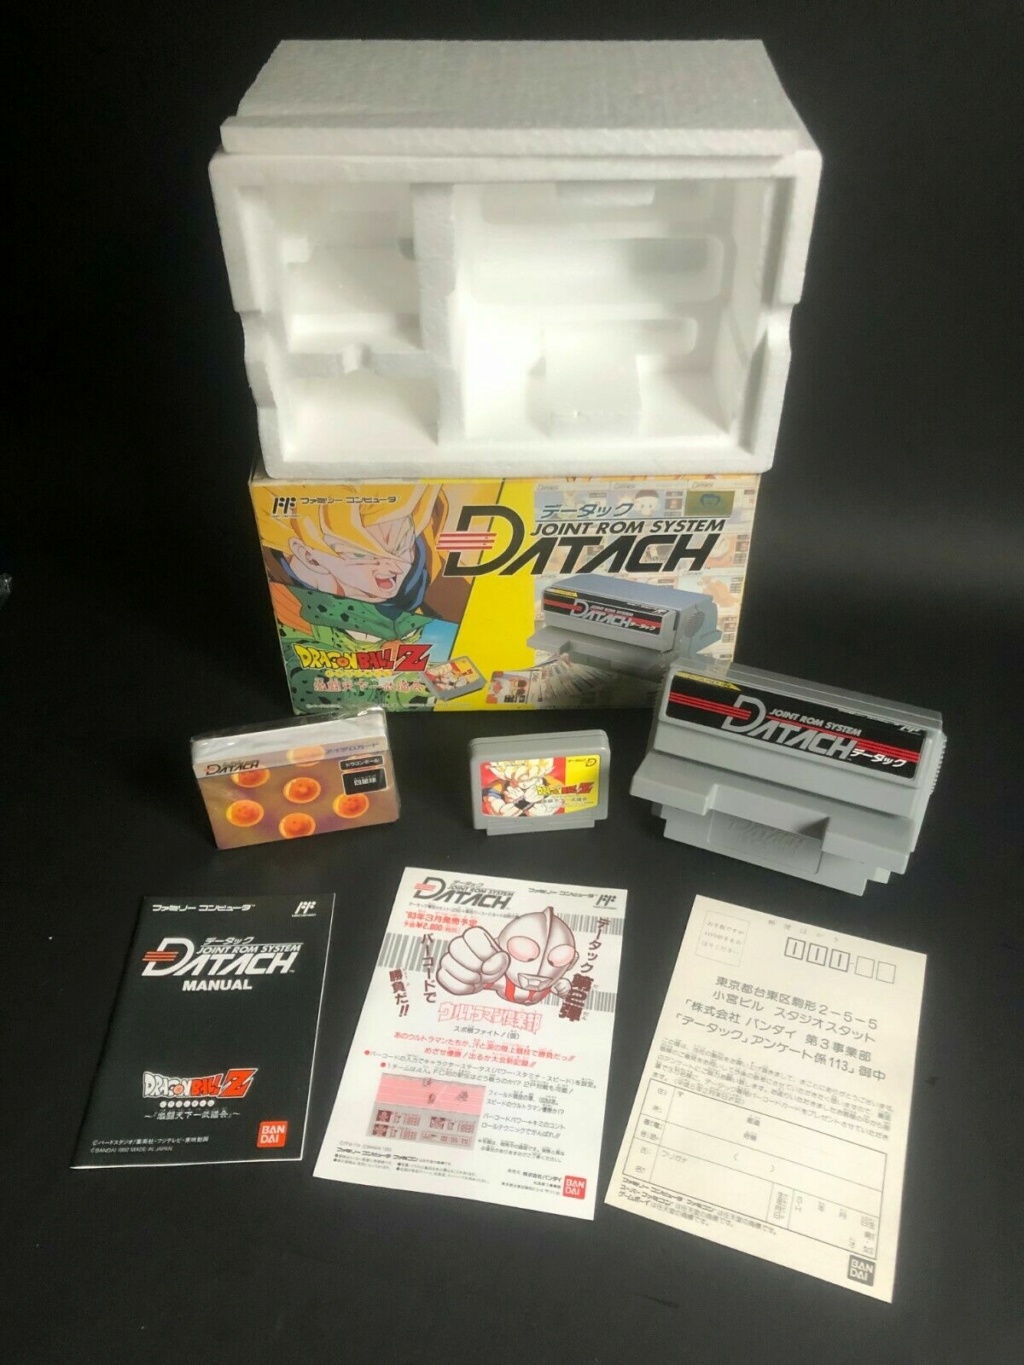 Dragon Ball Z Joint Rom System Datach + cartes (NES) 1489